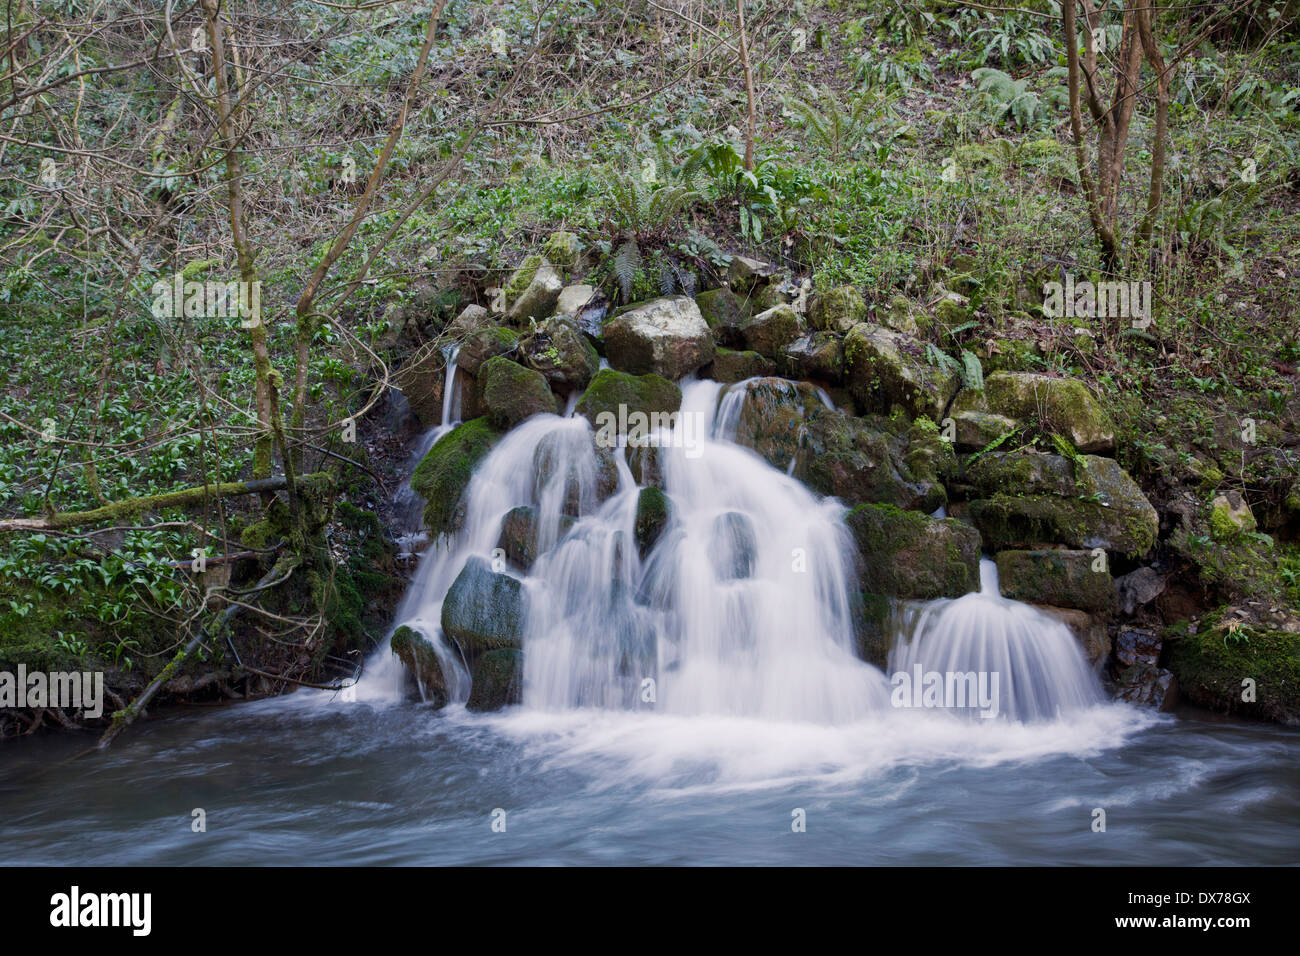 Waterfall at the Old Fussells Iron Works, Mells, Somerset, England, UK Stock Photo